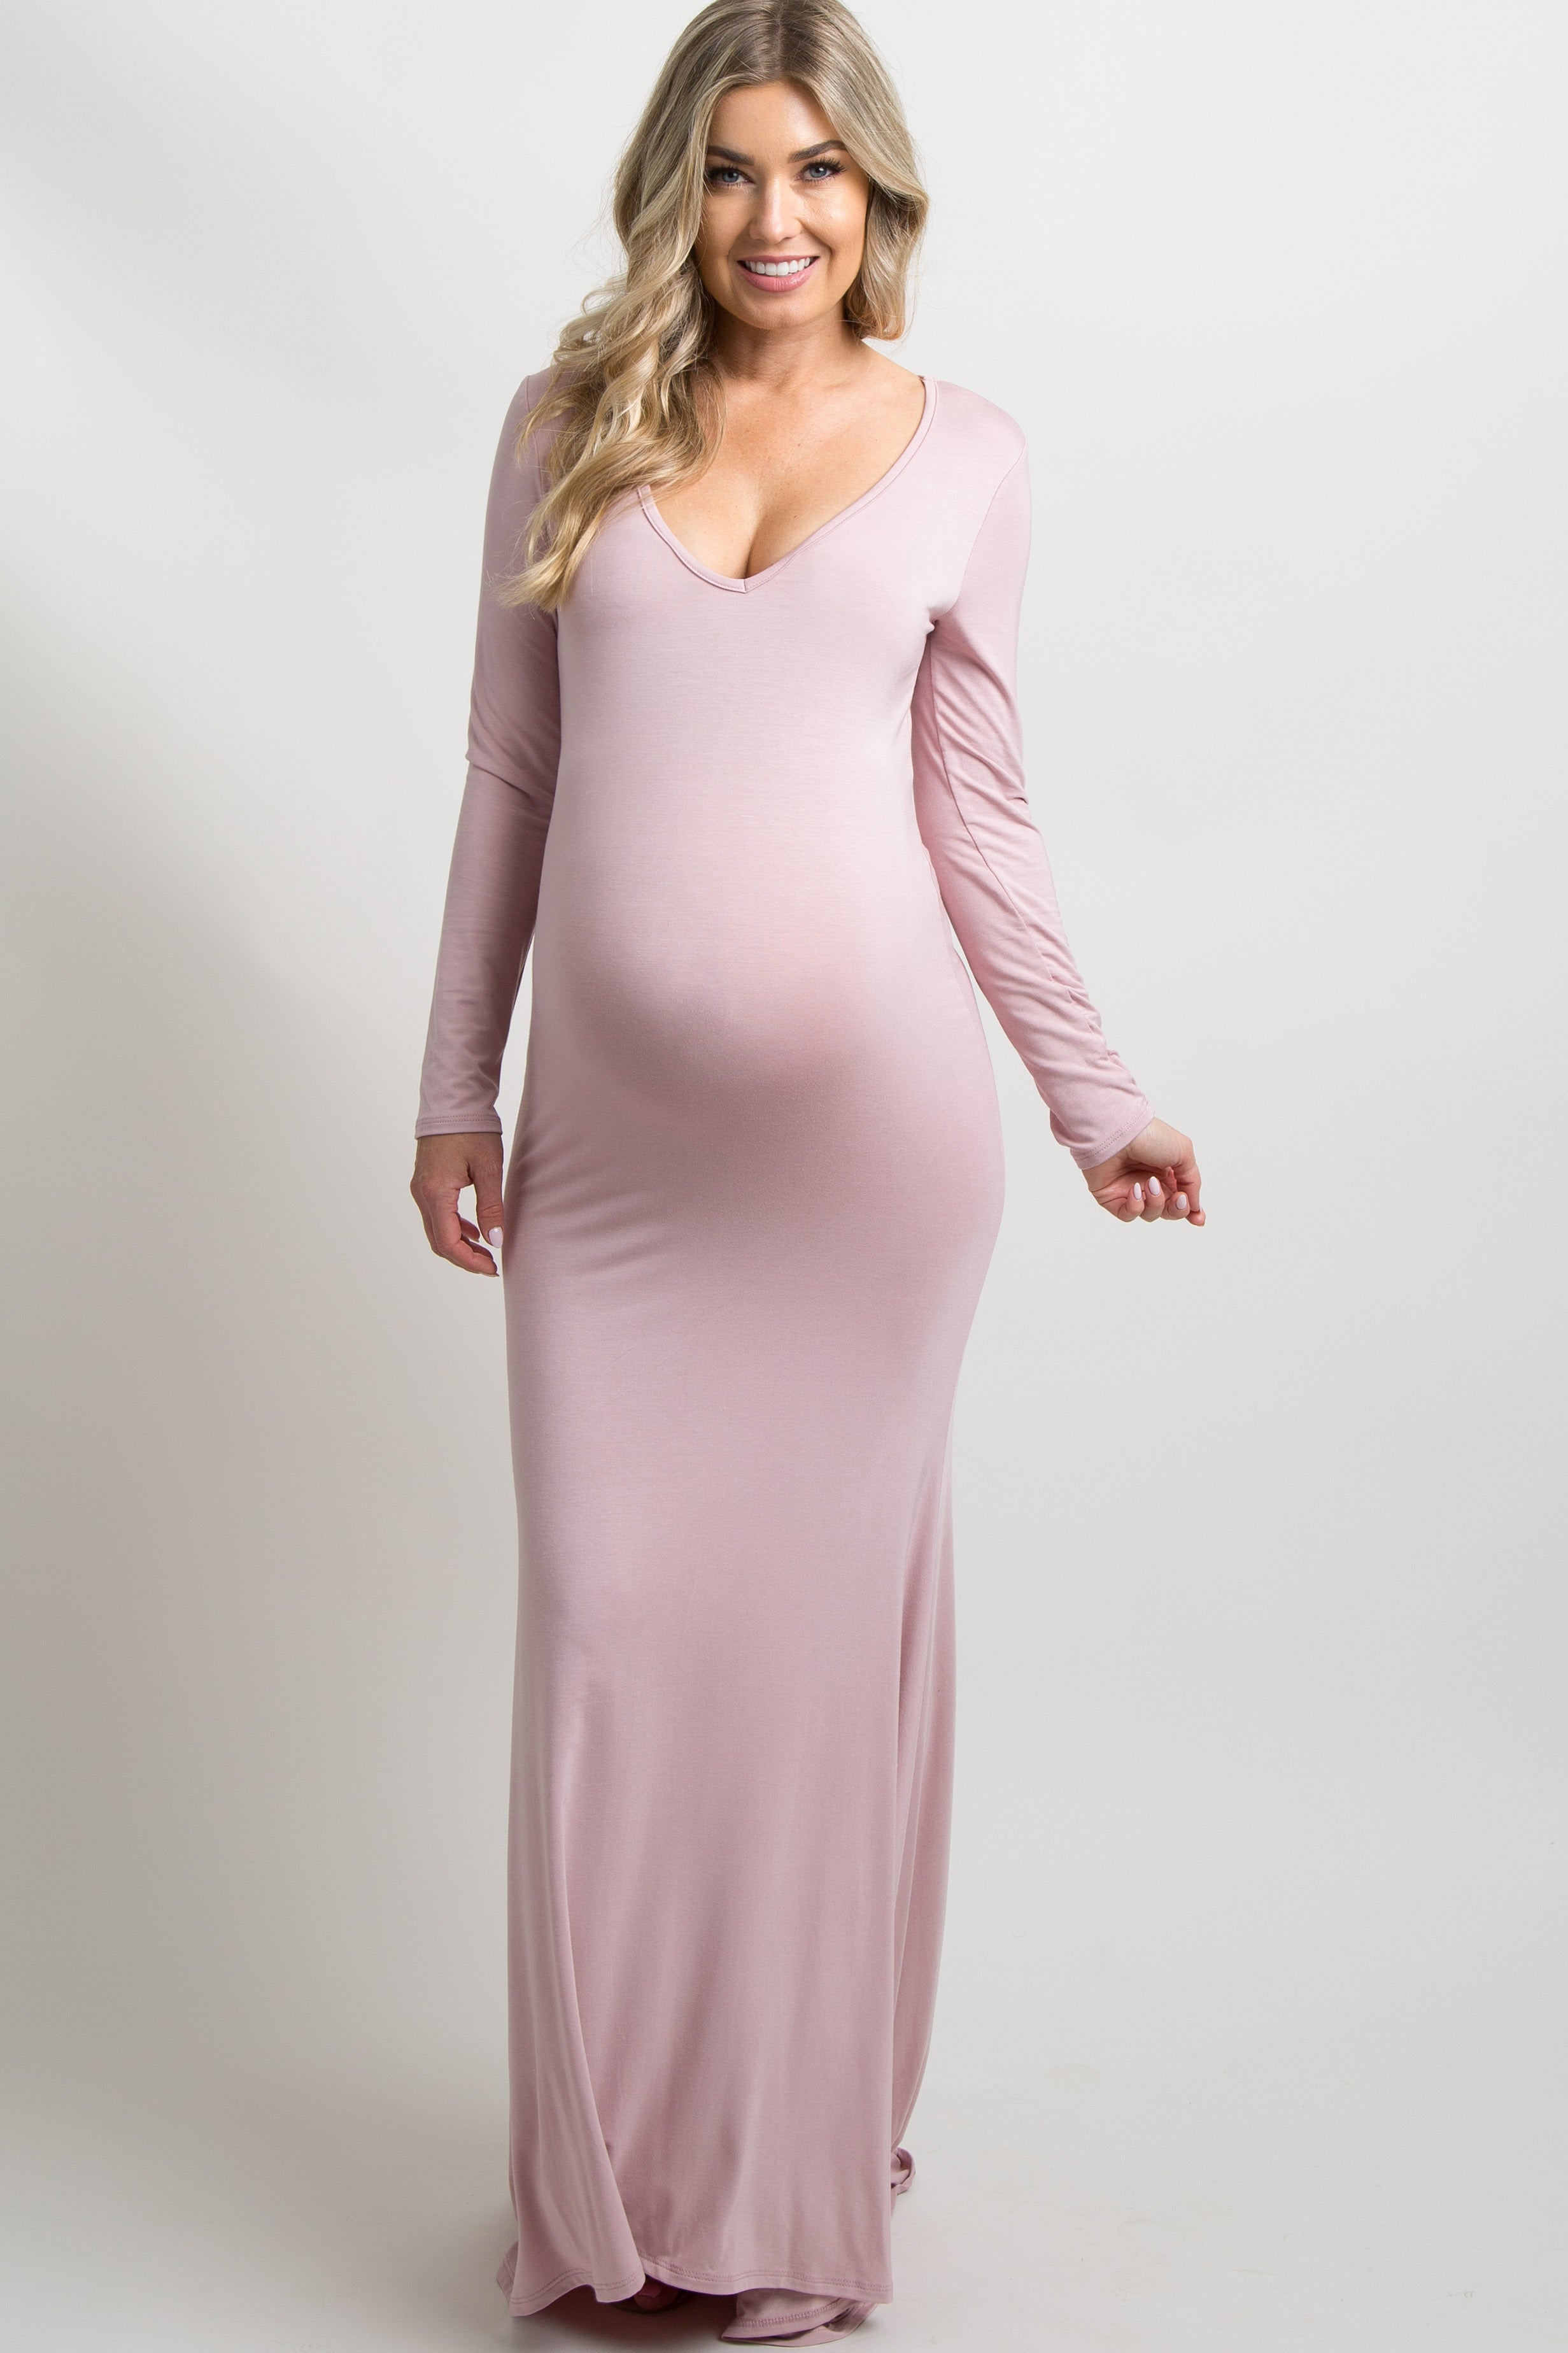 PinkBlush - Maternity Clothes For The Modern Mother  Maternity dresses, Pink  blush maternity, Maternity clothes